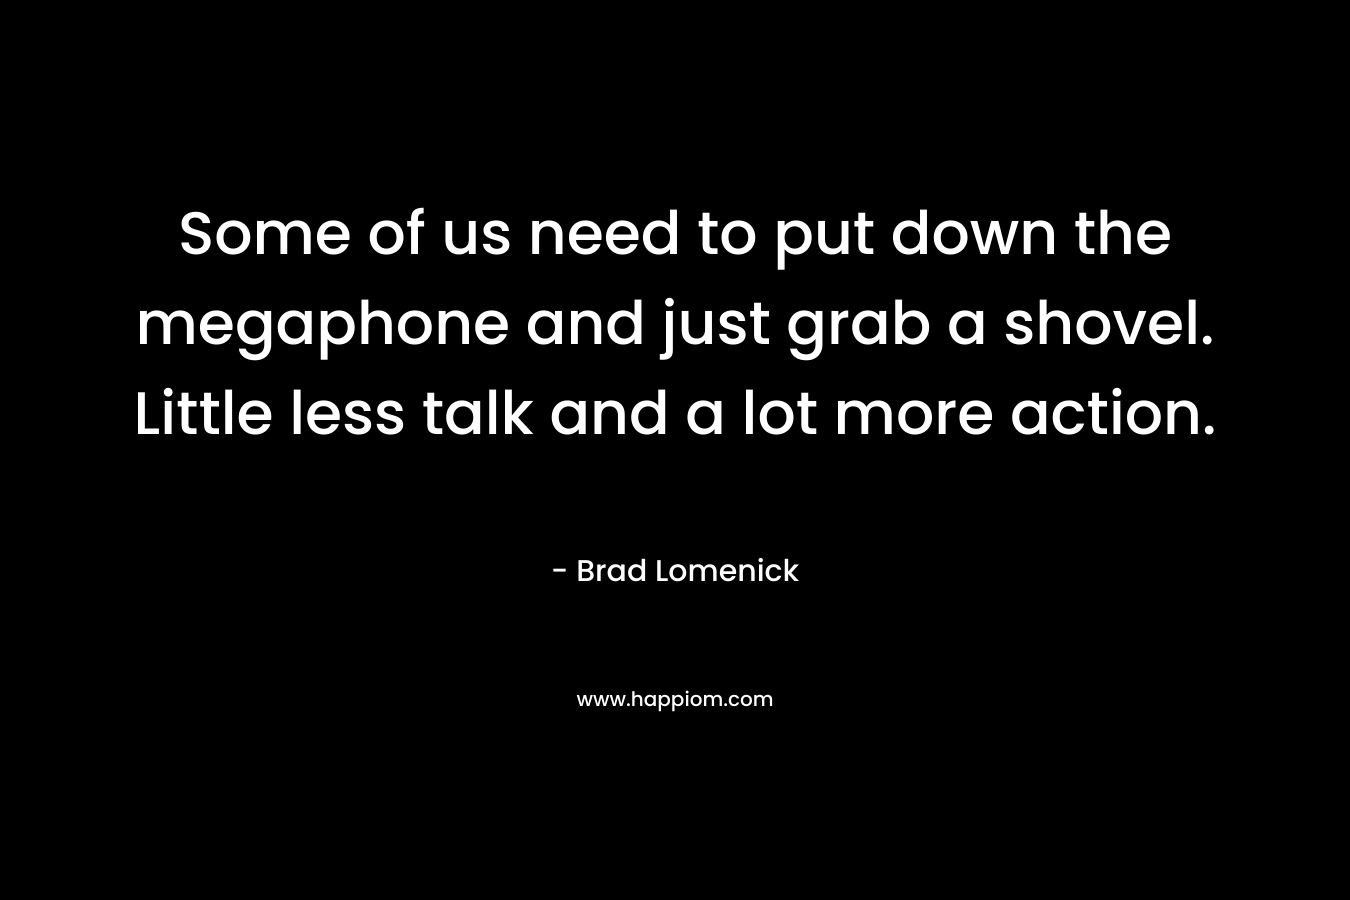 Some of us need to put down the megaphone and just grab a shovel. Little less talk and a lot more action. – Brad Lomenick